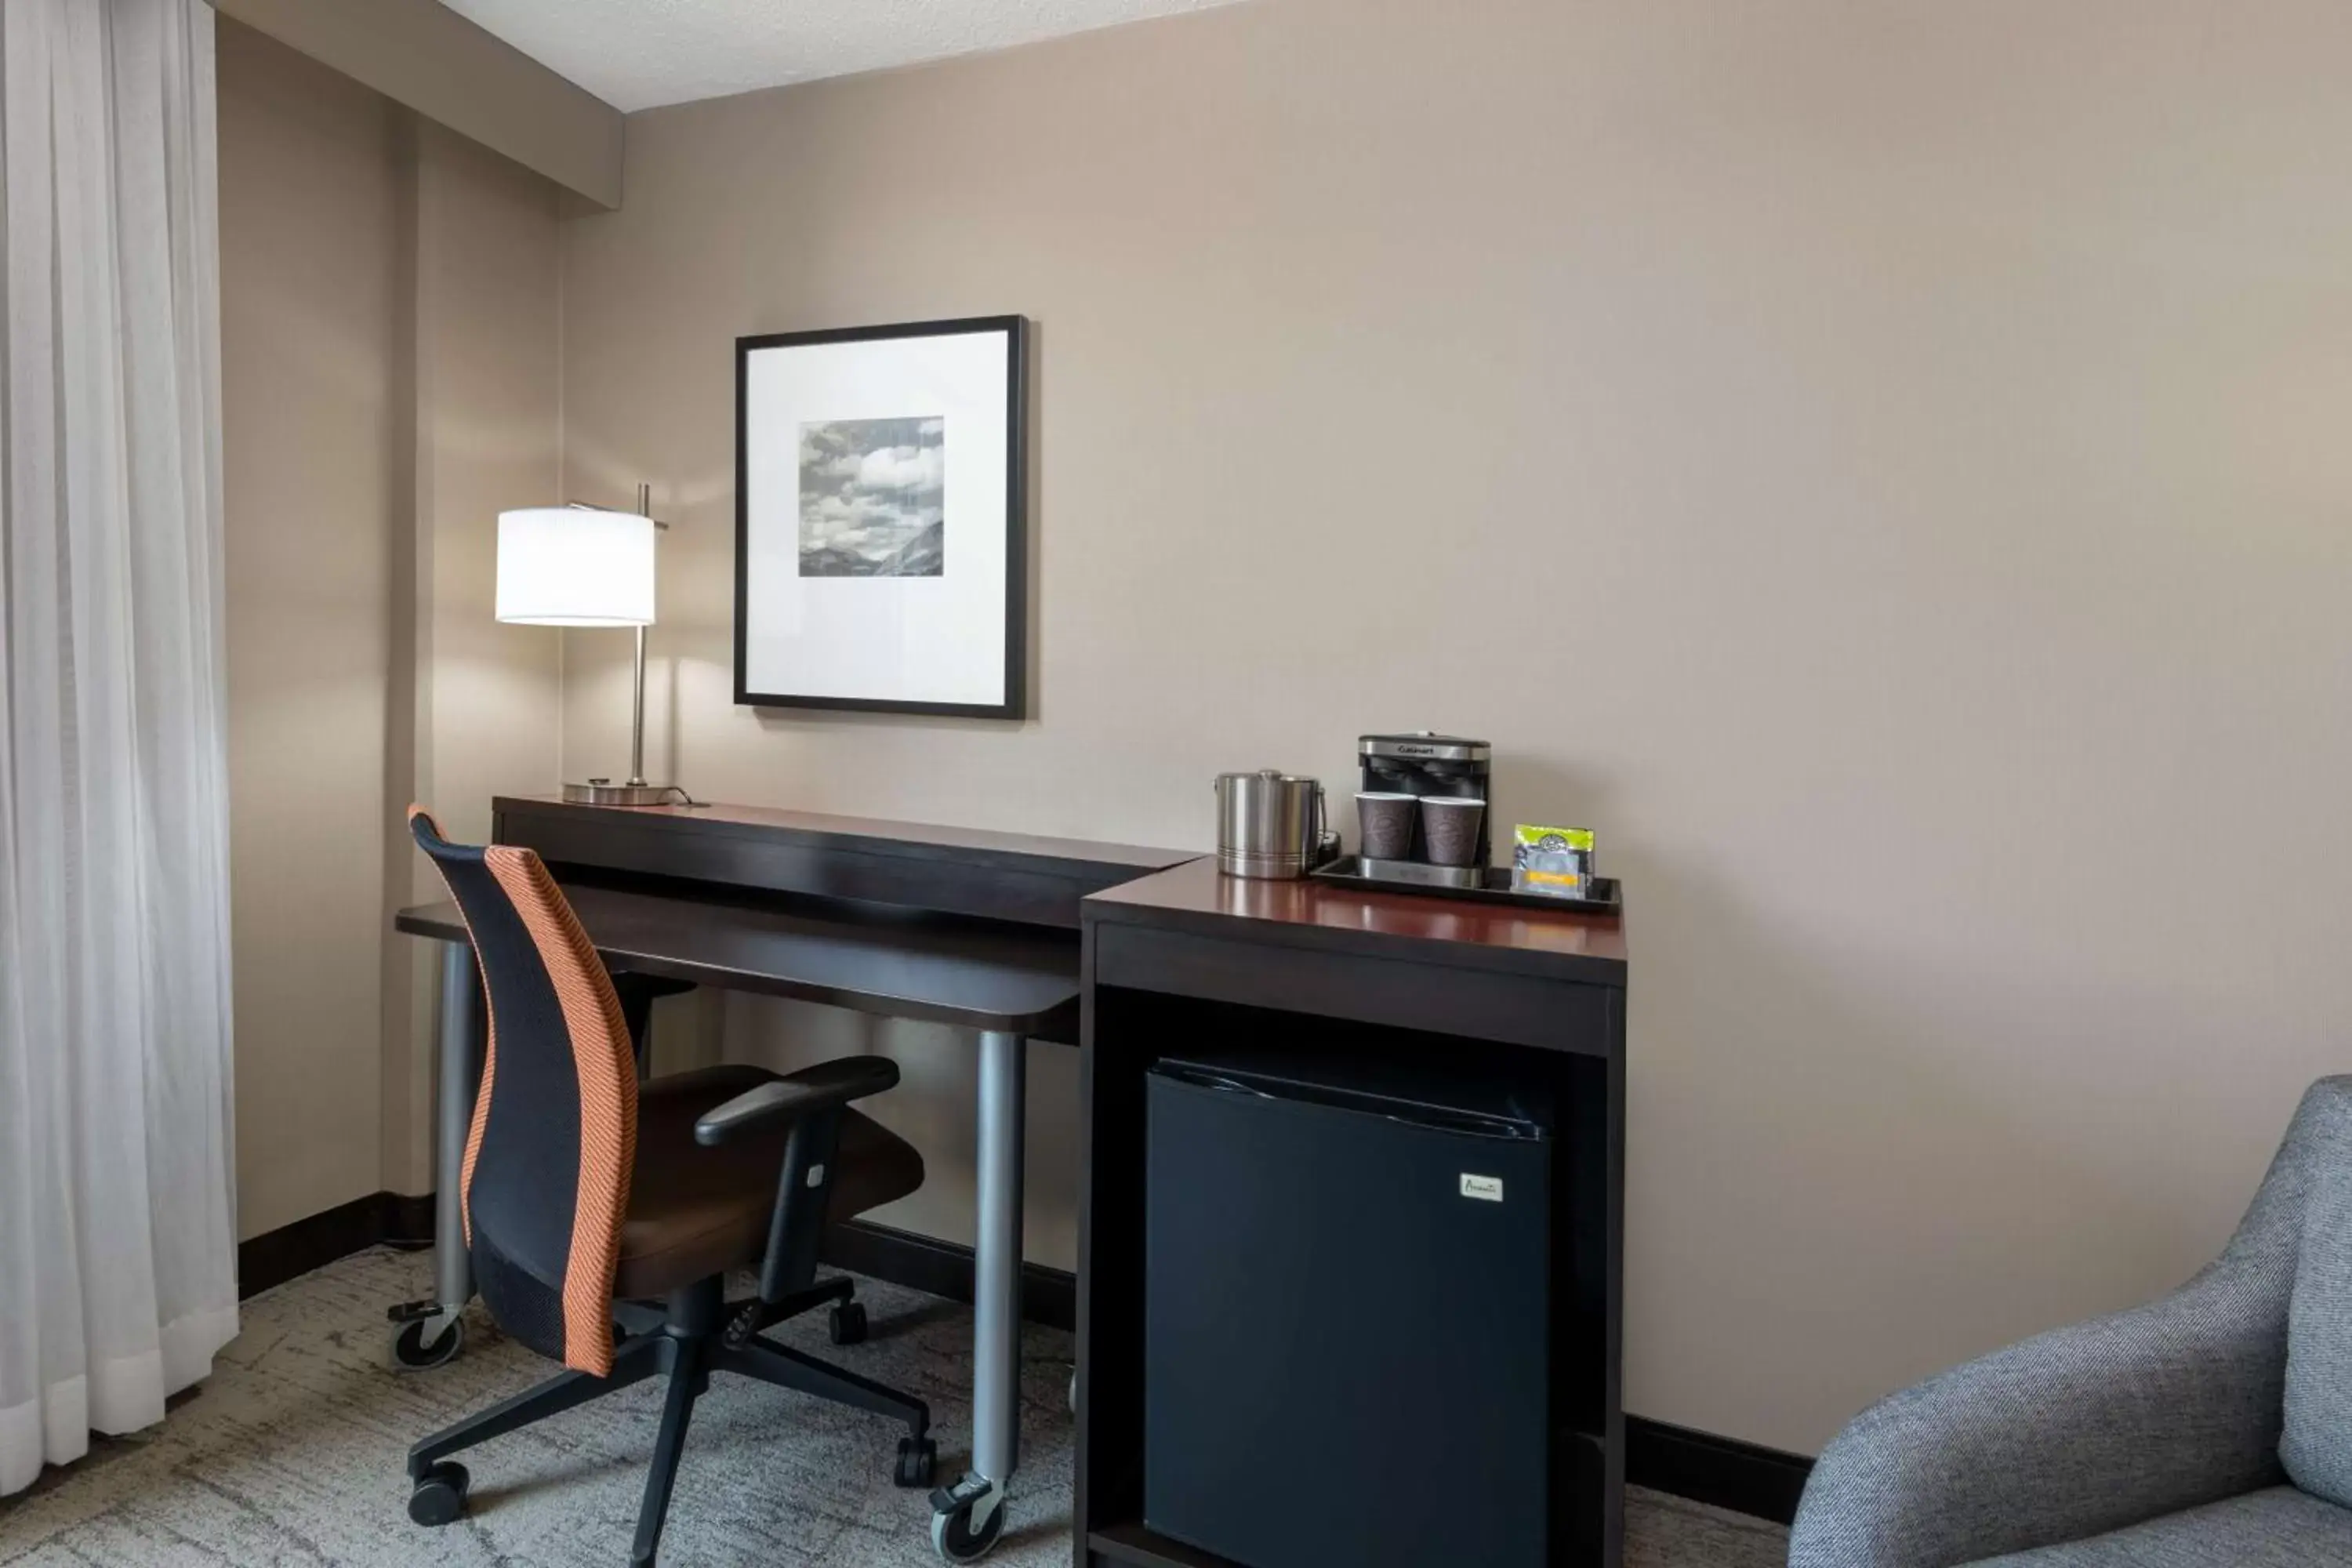 Bedroom, TV/Entertainment Center in DoubleTree by Hilton Denver Cherry Creek, CO